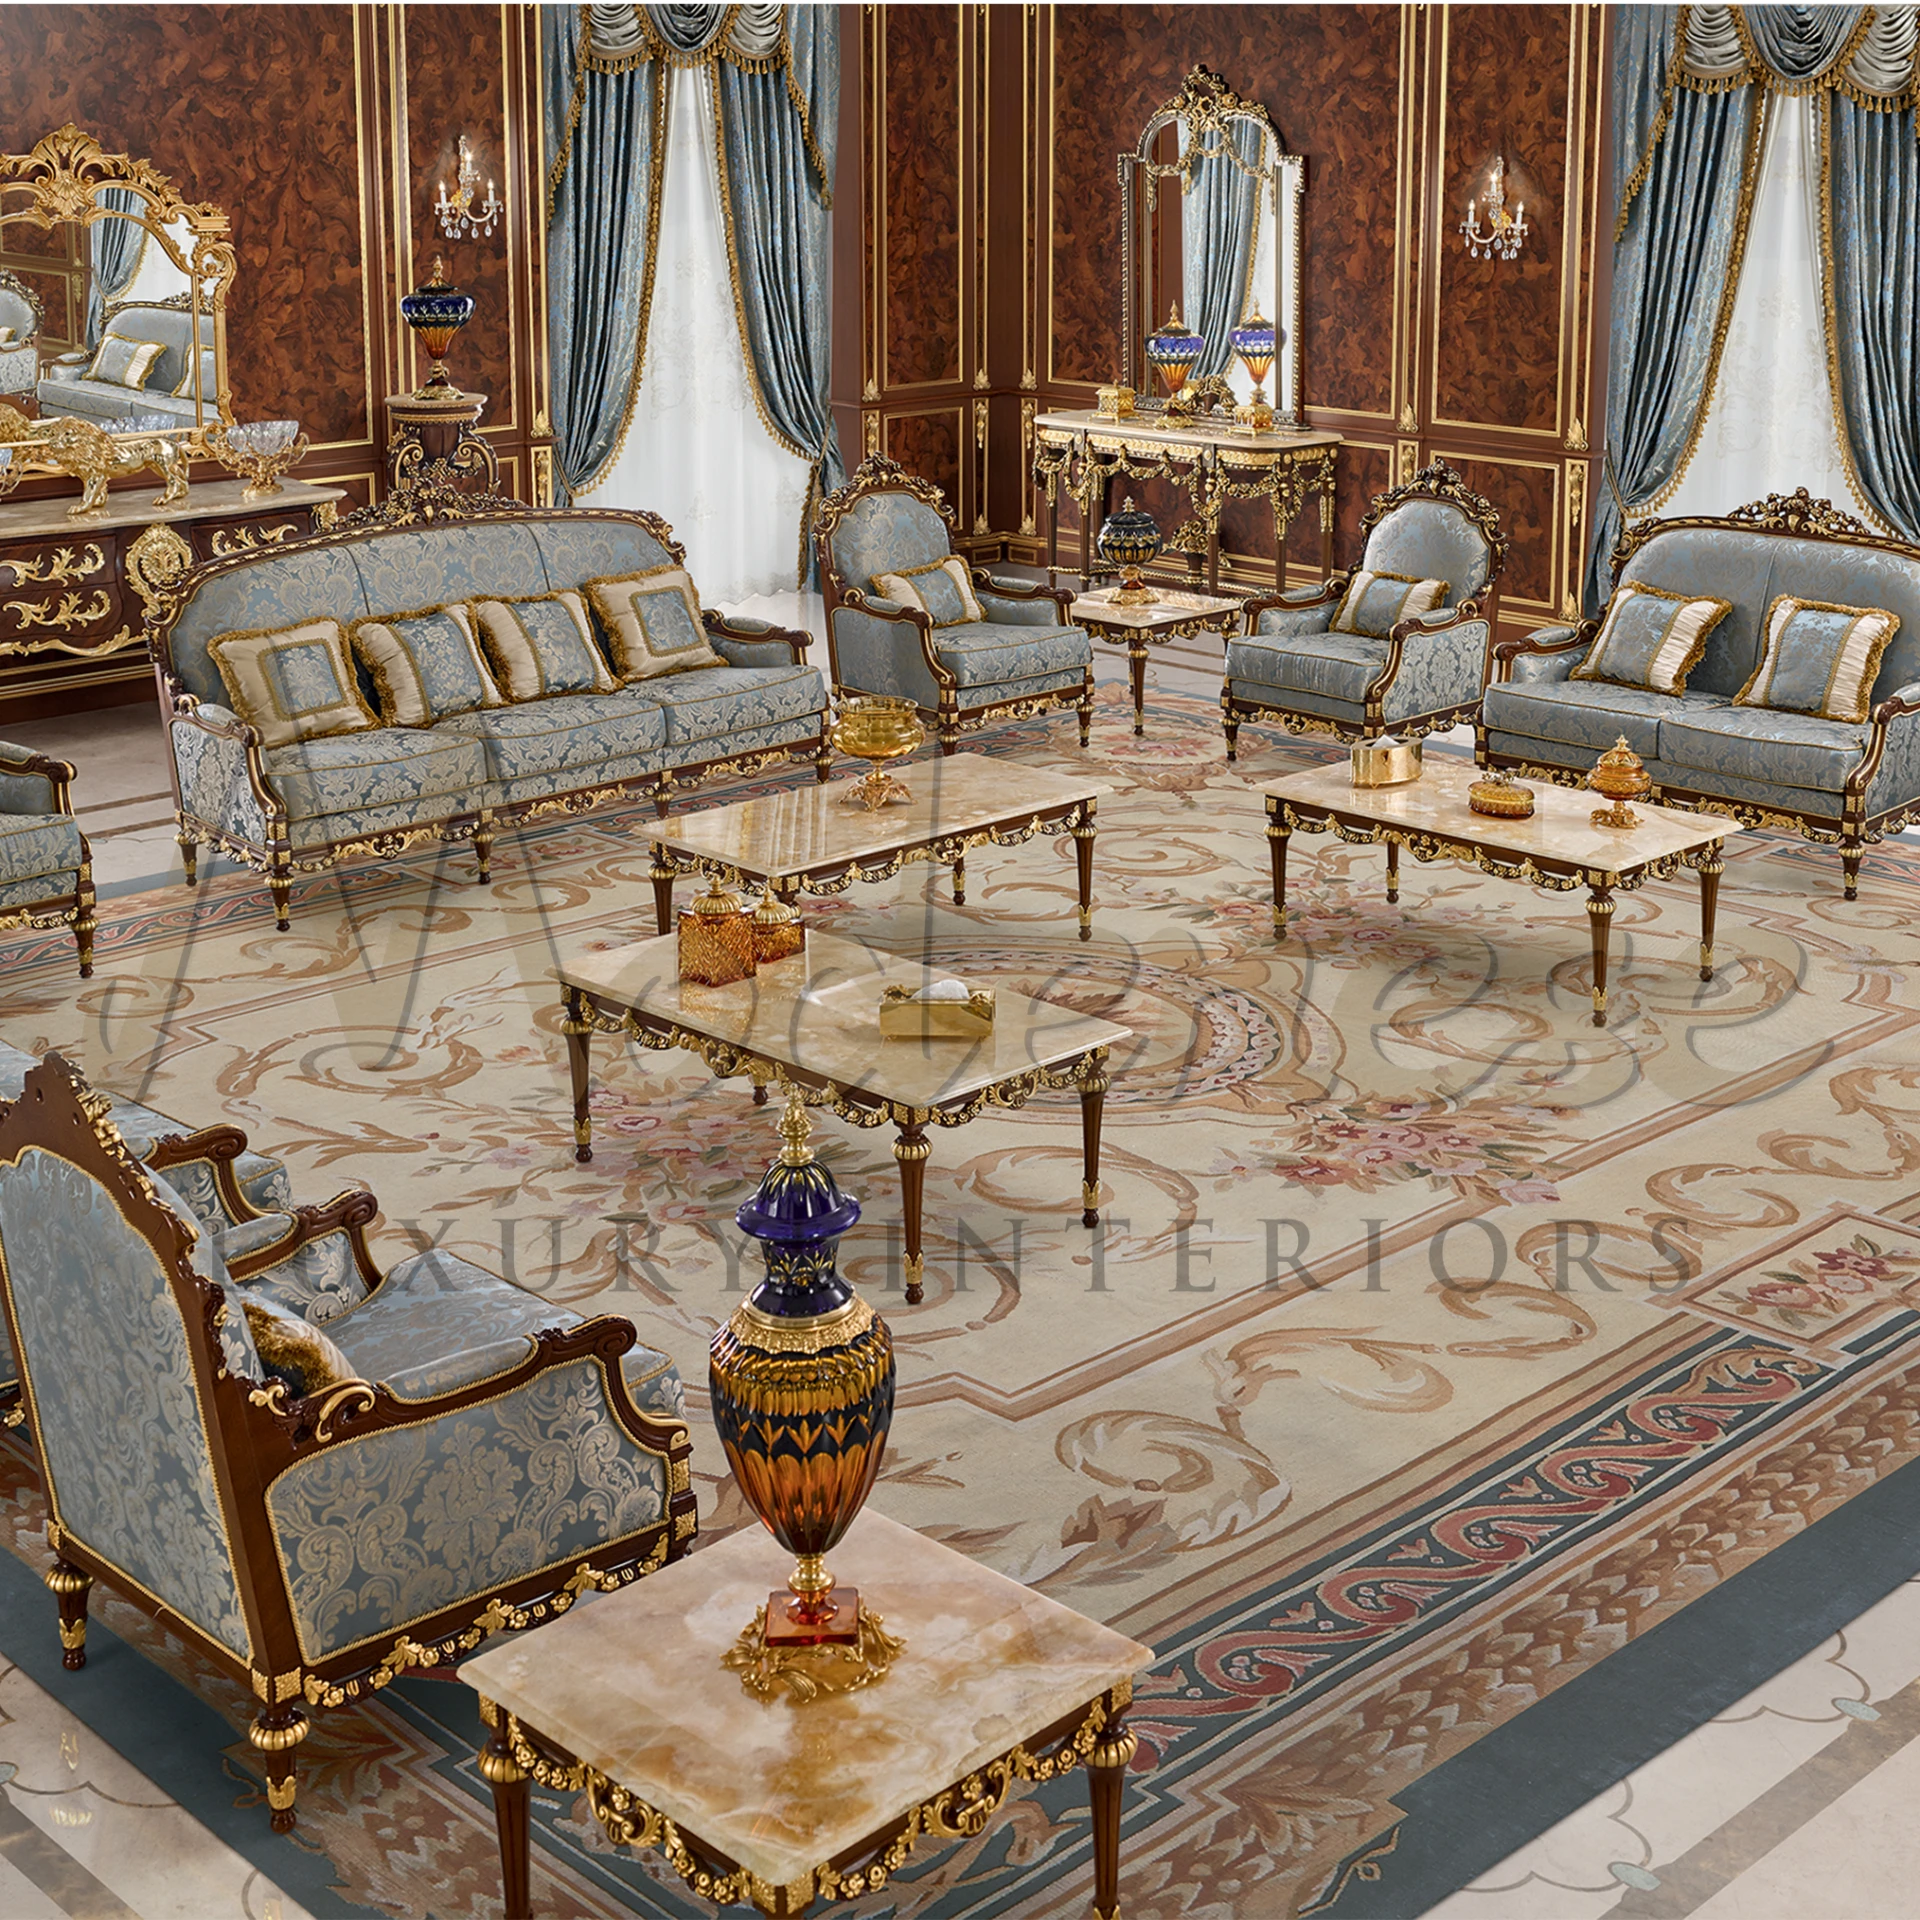 Traditional palace design Imperial Sofa, covered in exquisite silk-blend fabric with elaborate leg and seating crown carvings.
